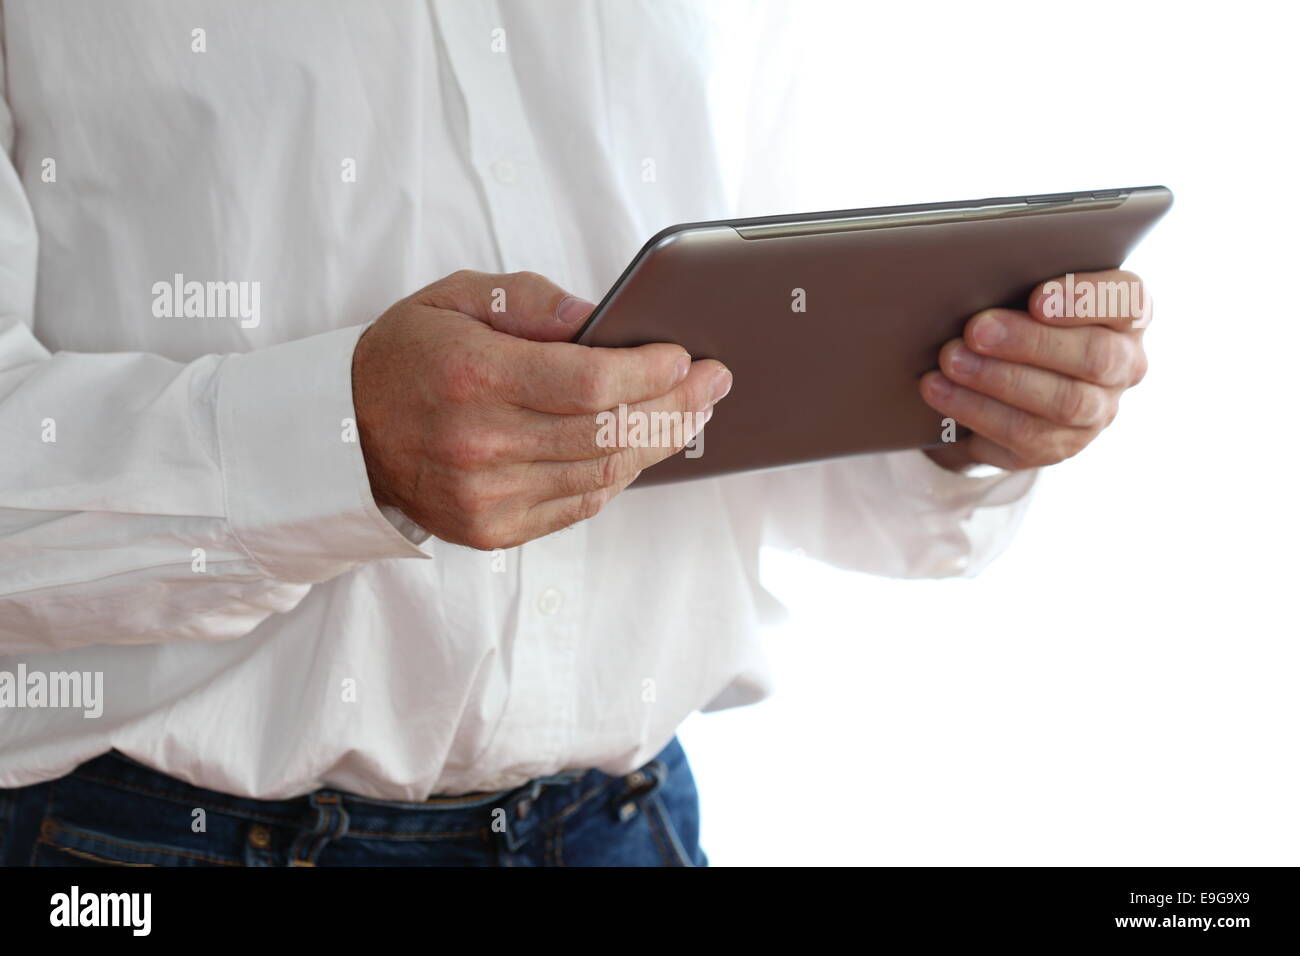 mobile computer in hand Stock Photo